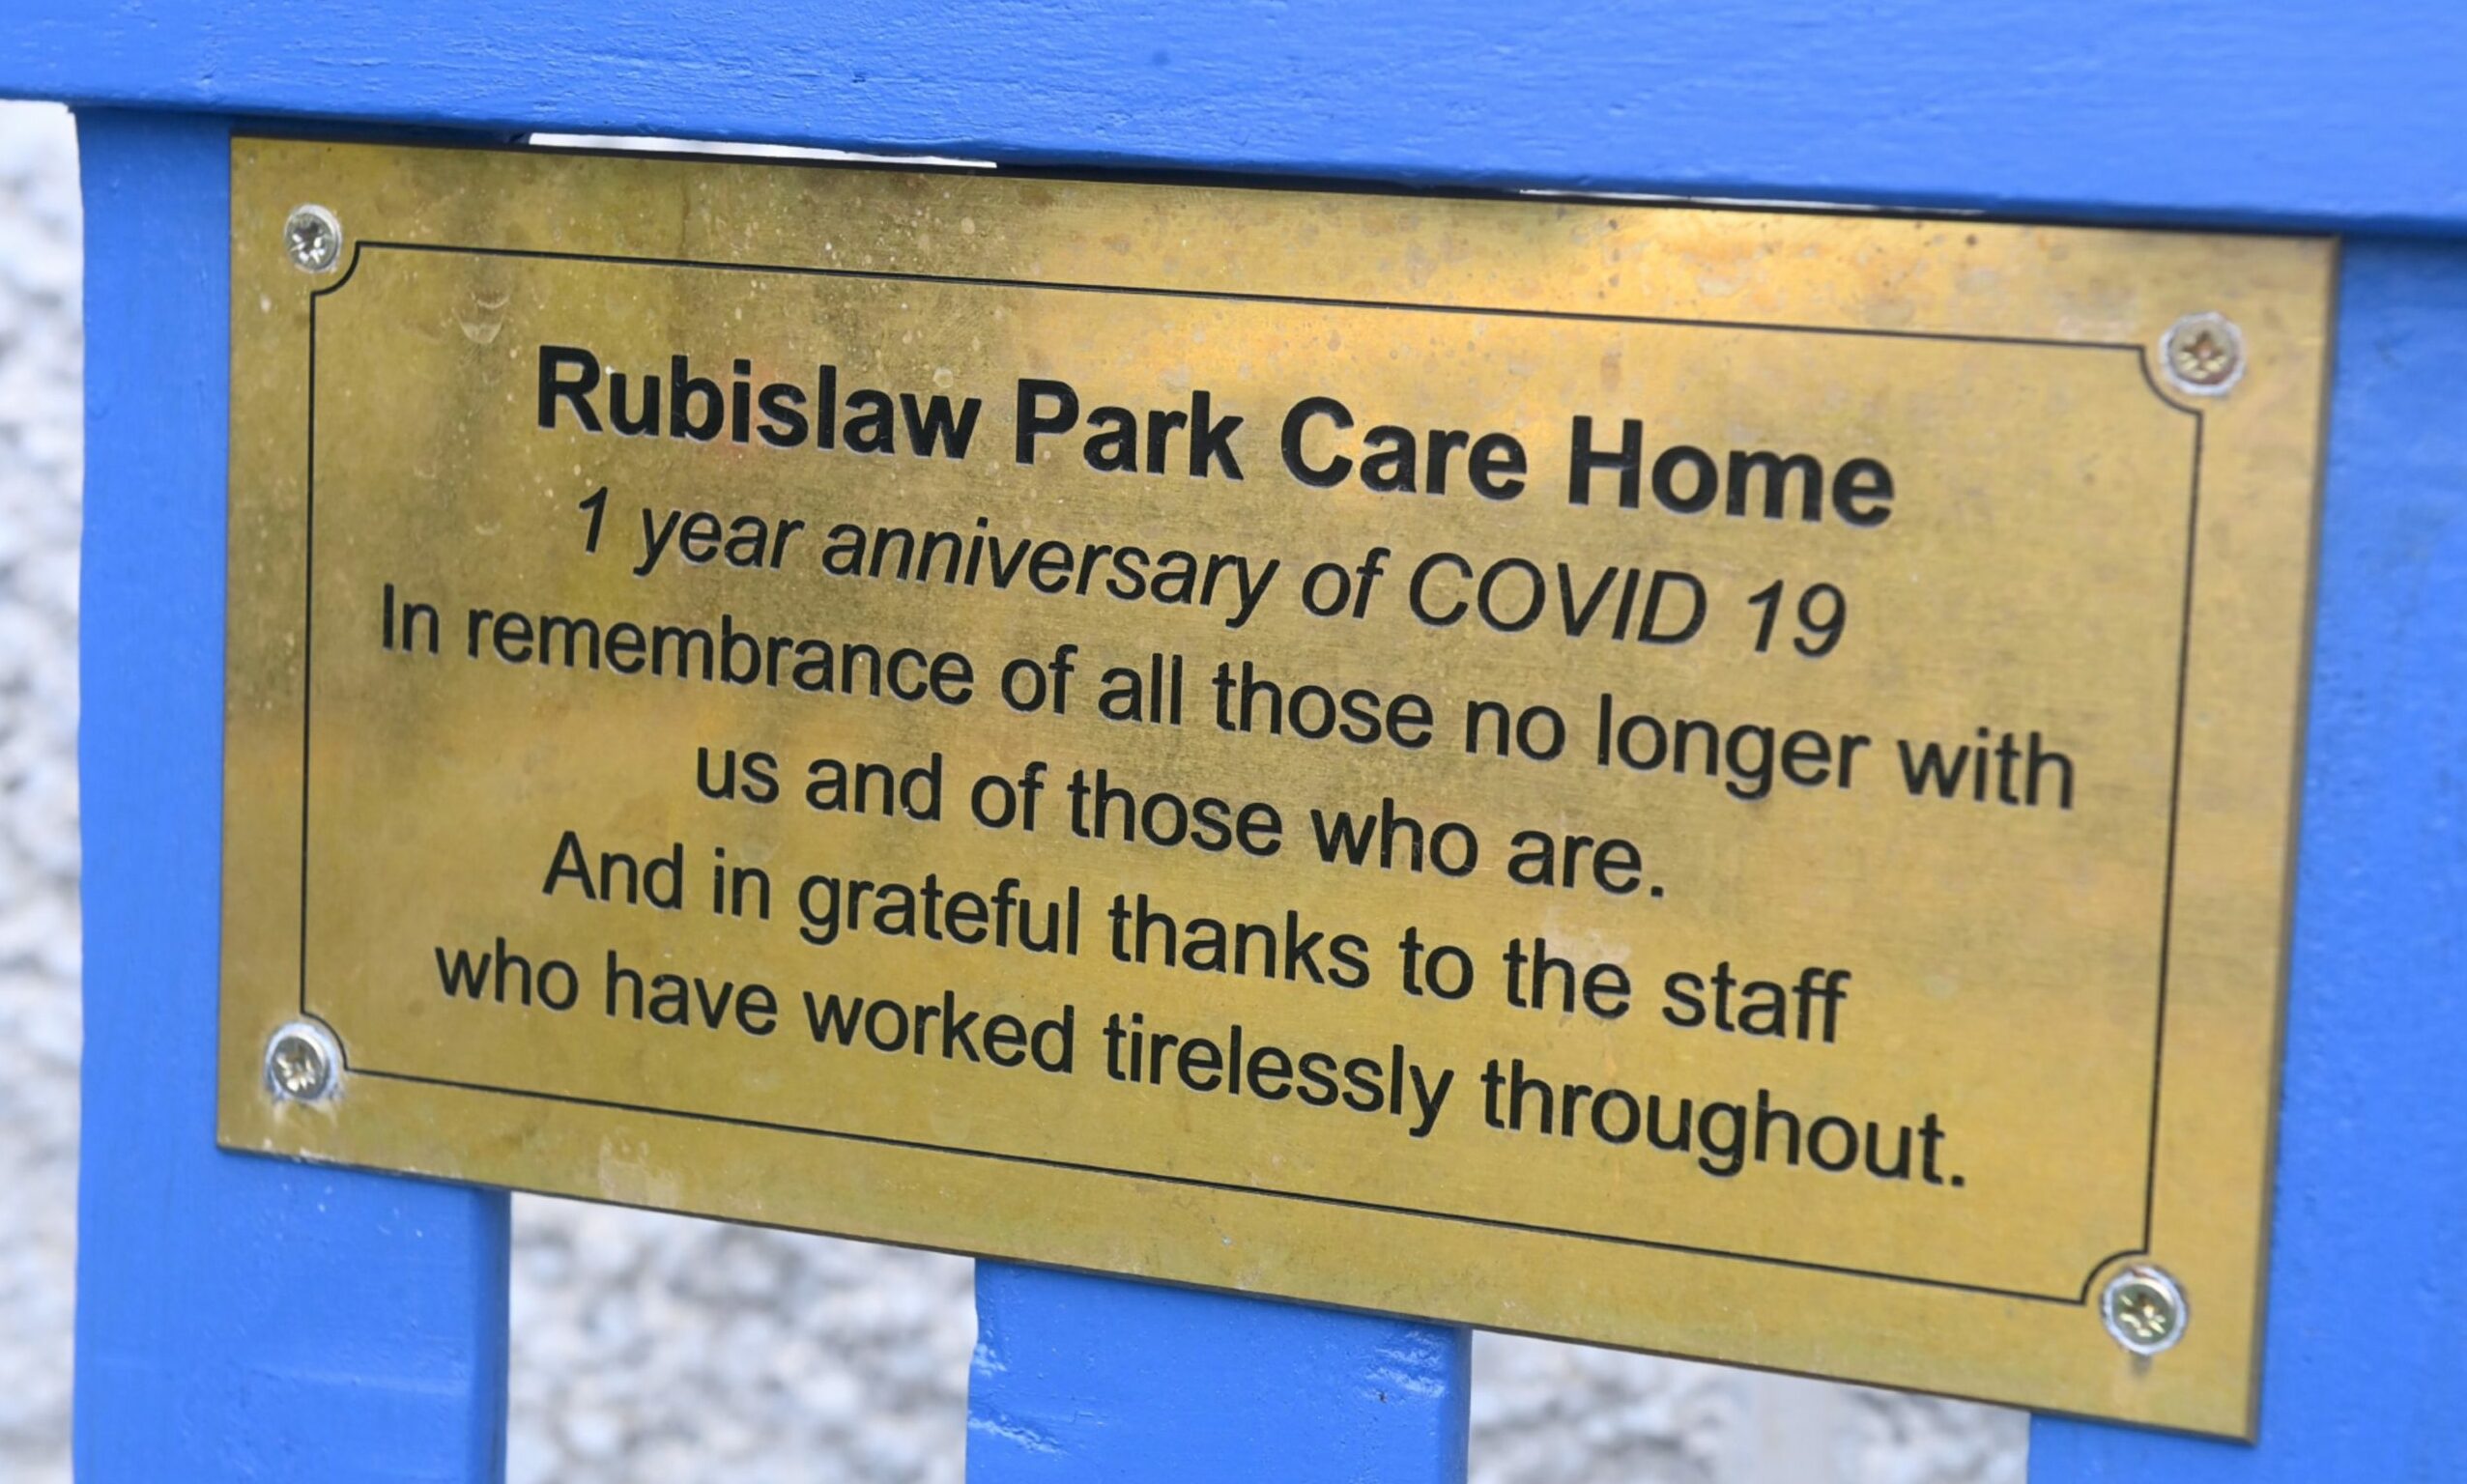 The plaque on the Rubislaw Park memorial bench.